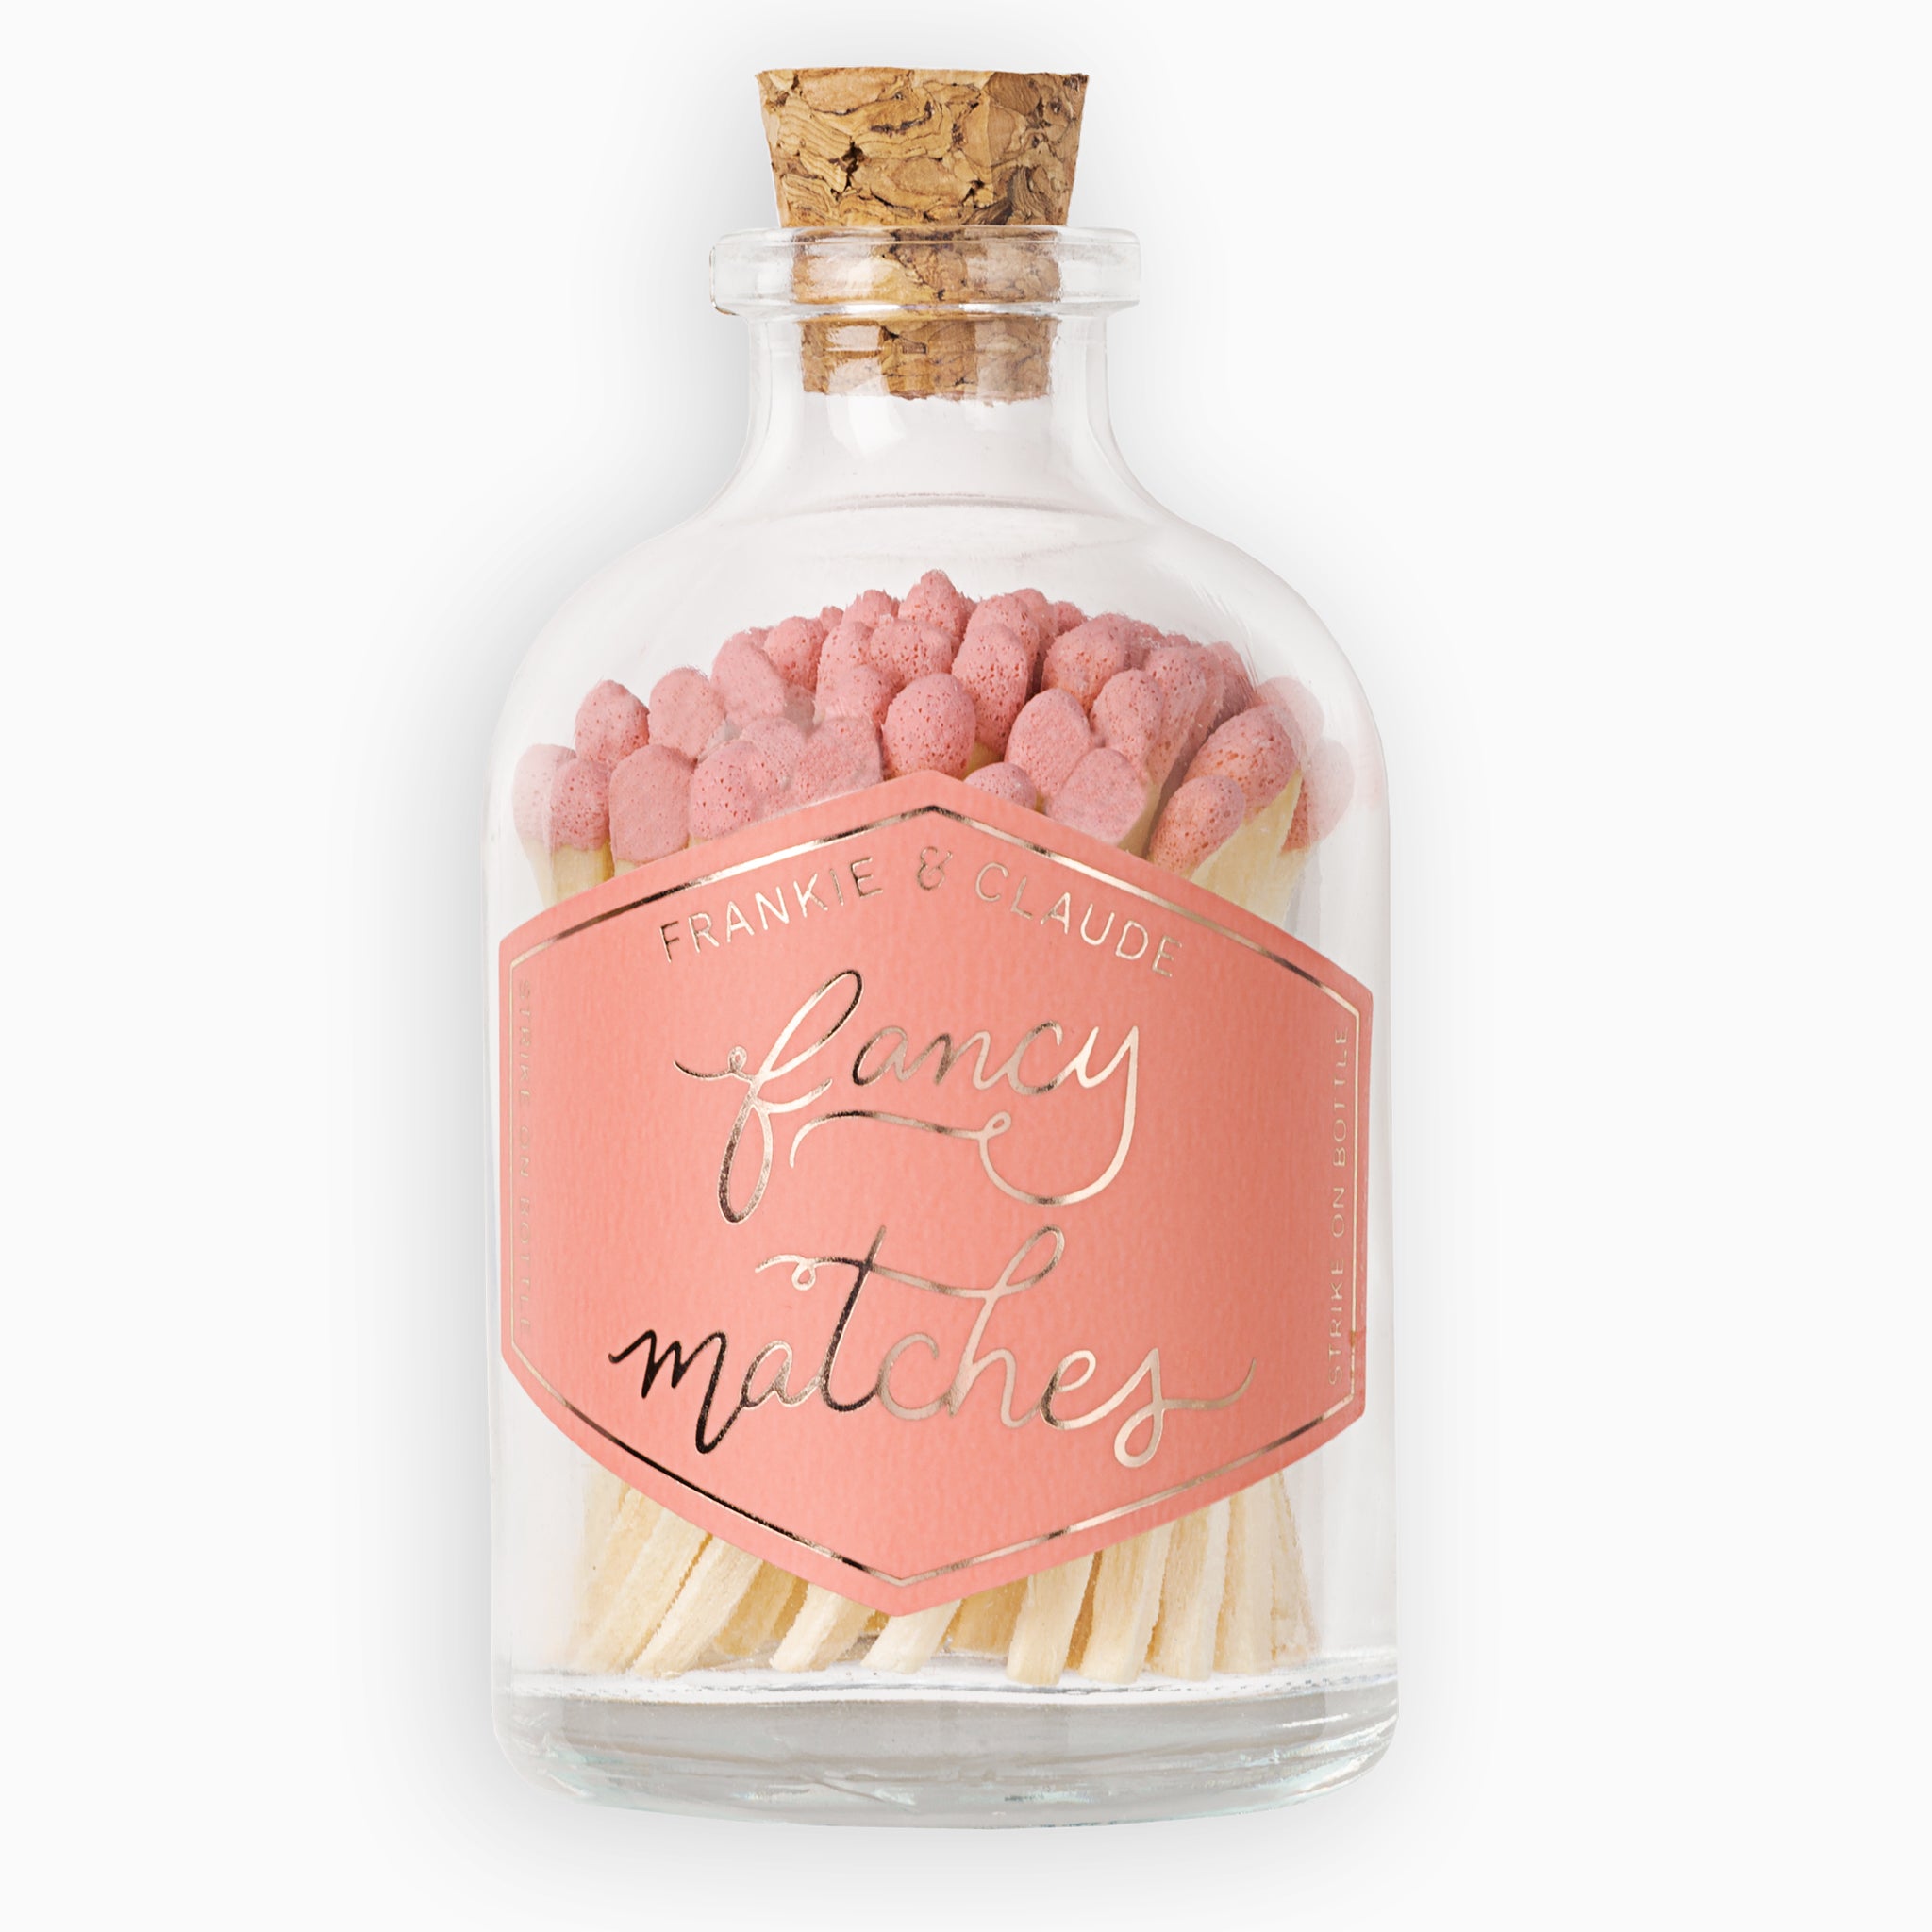 Whimsical Pink Match Jar by Frankie & Claude, featuring beautifully colored pink matches in a sophisticated corked apothecary jar.